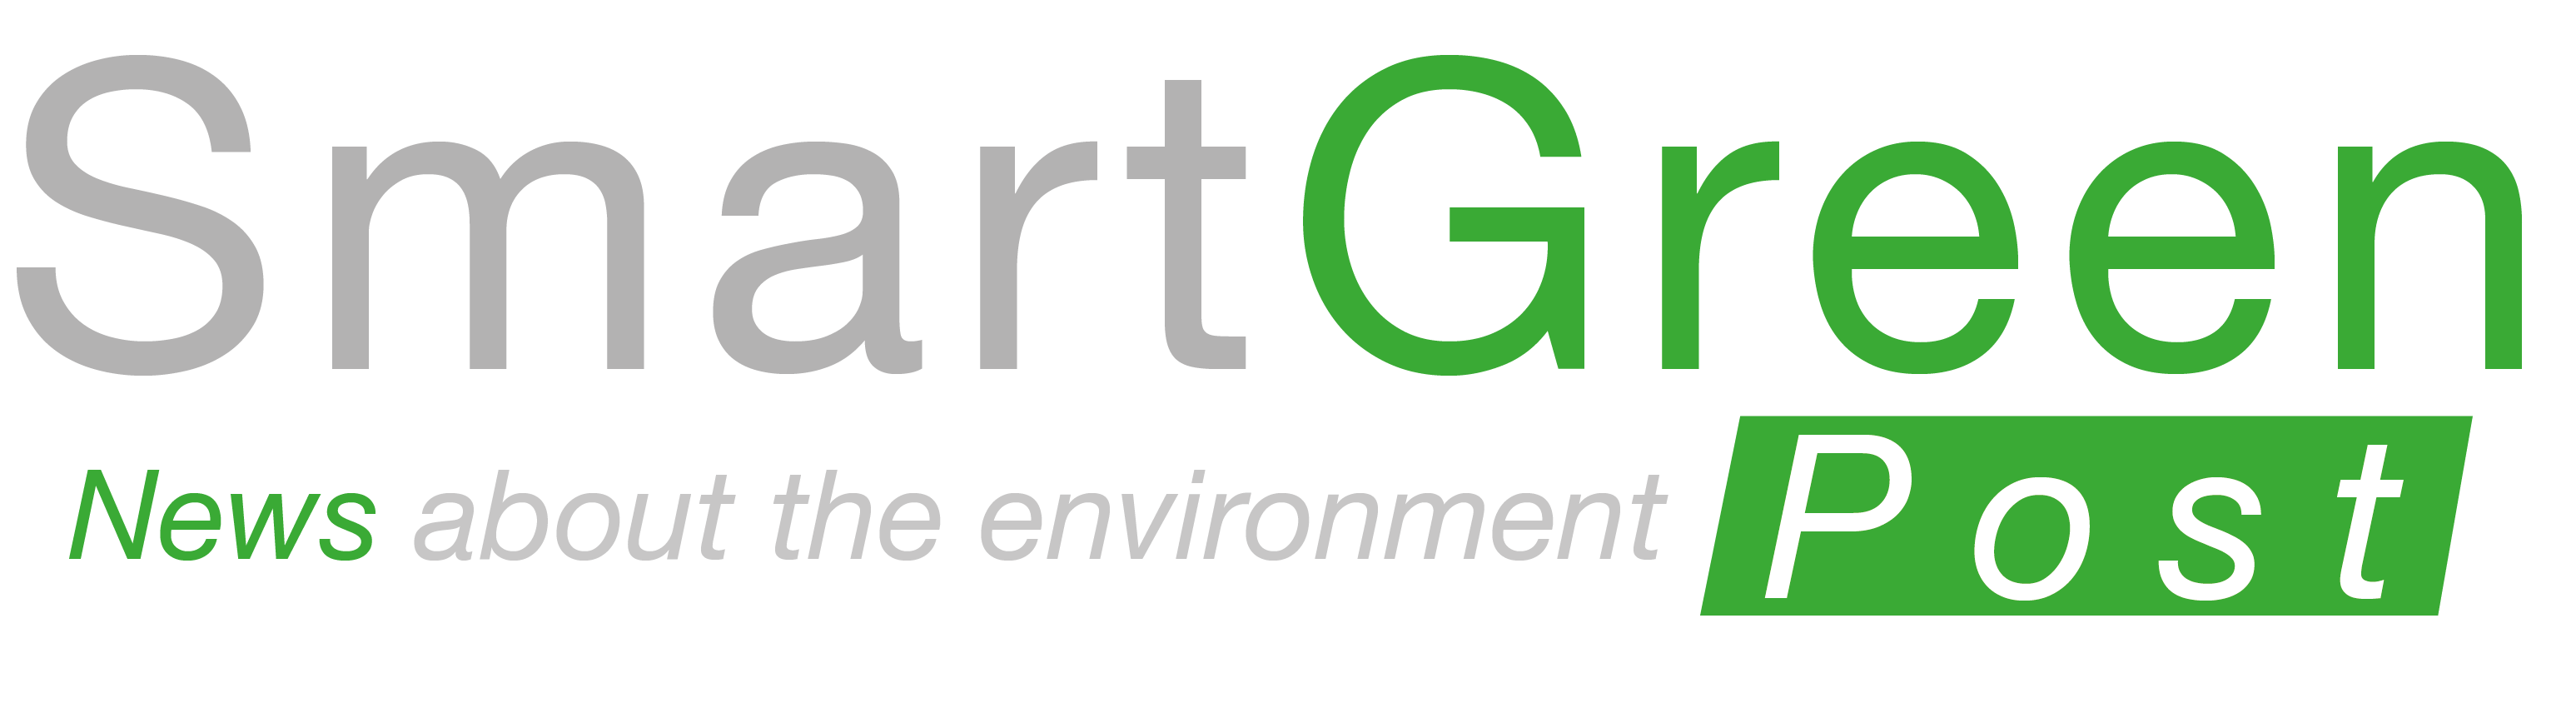 SmartGreenPost | news from the environment - green news - separate waste collection